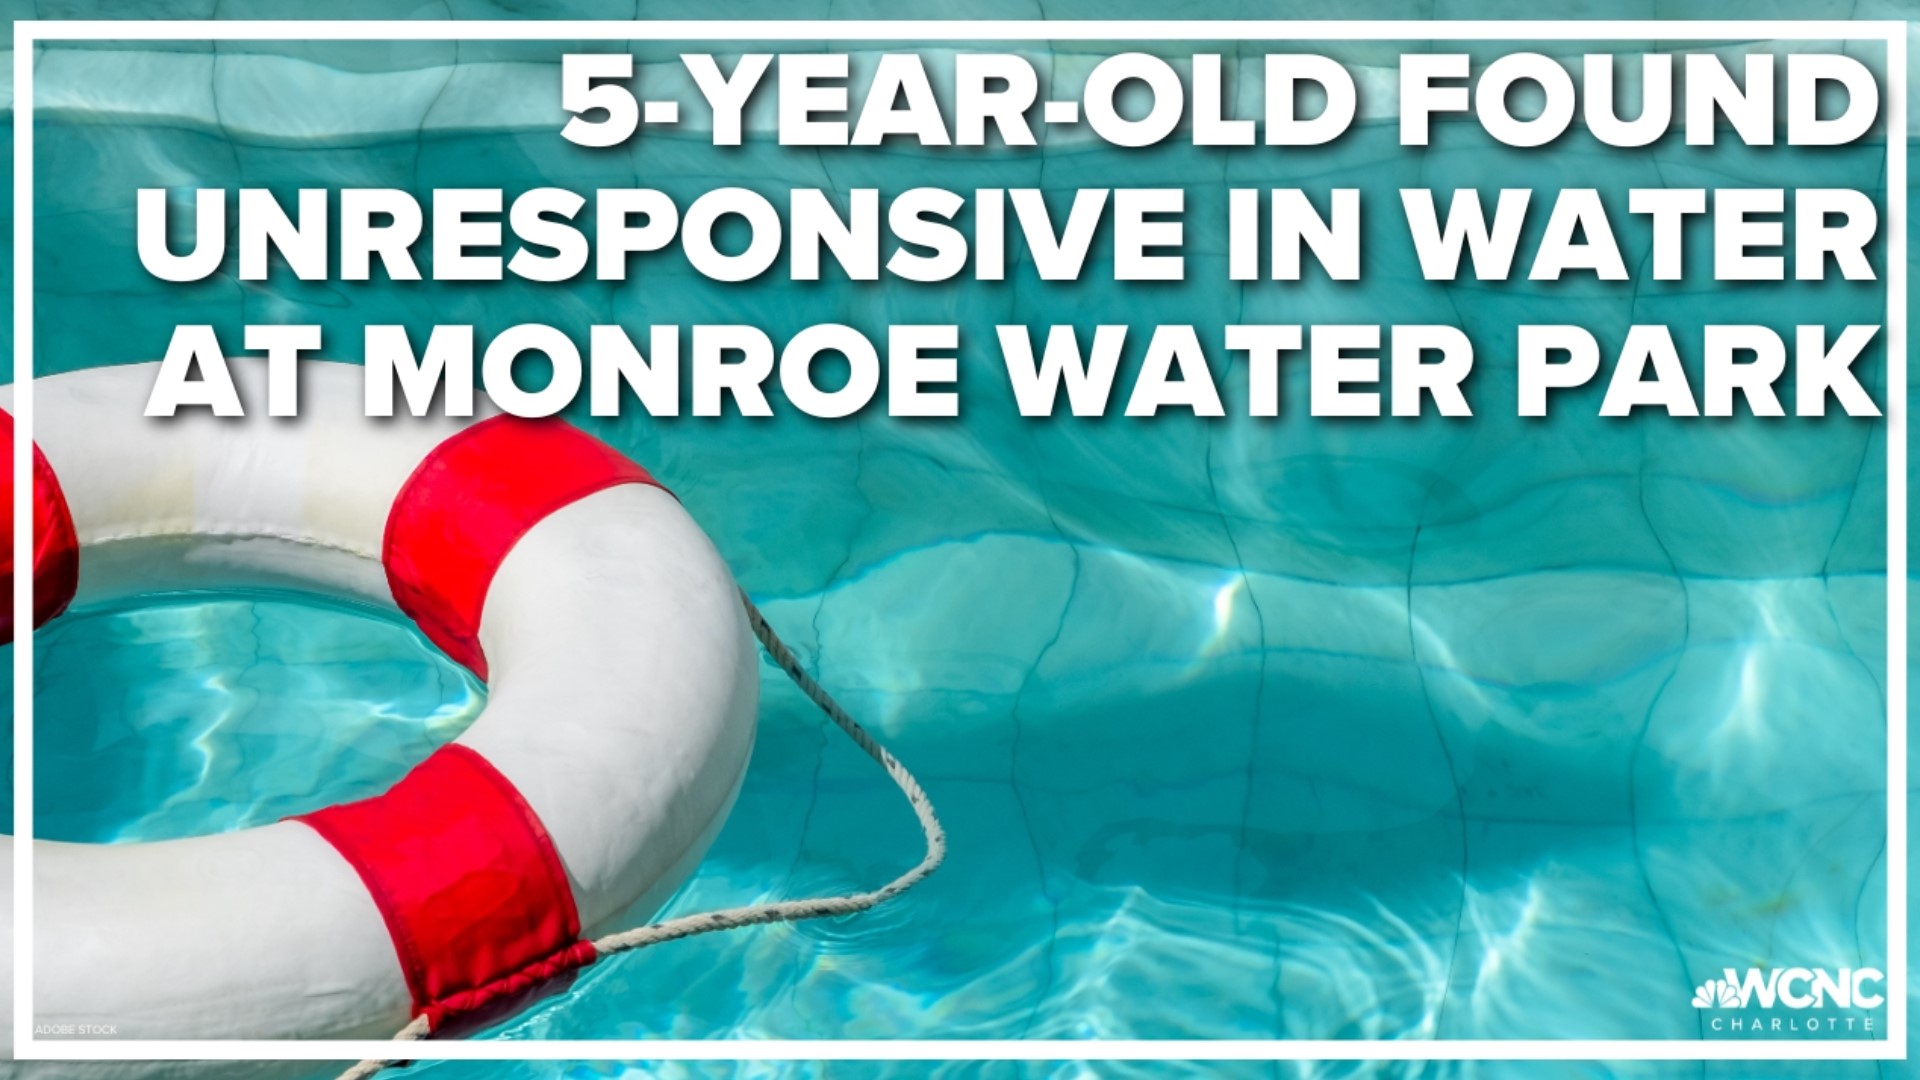 5-year-old-found-unresponsive-in-water-at-monroe-water-park-wcnc